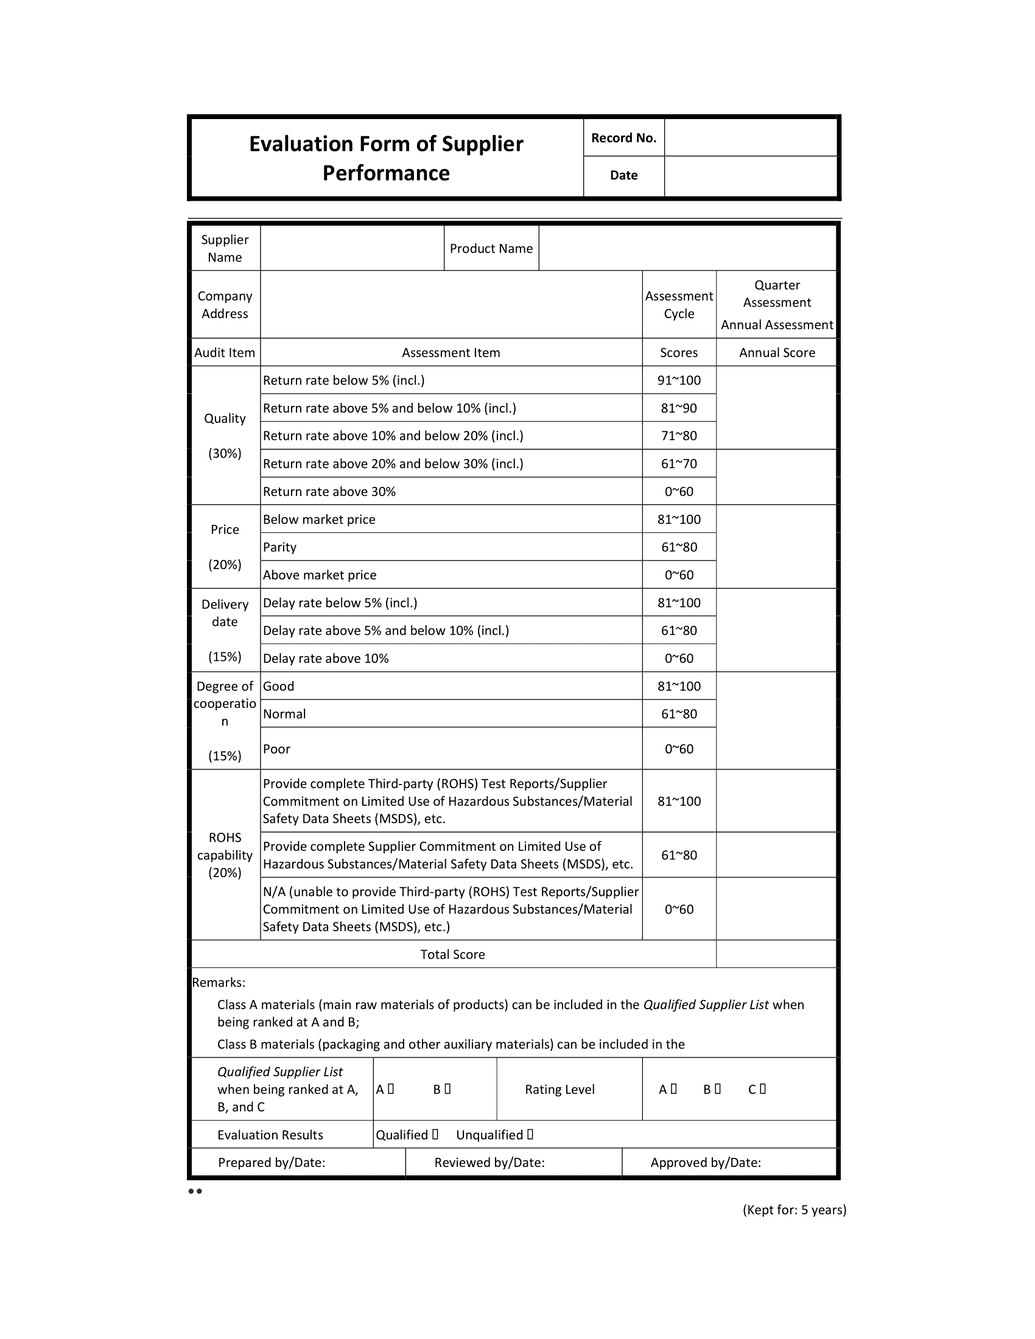 Evaluation Form of Supplier Performance